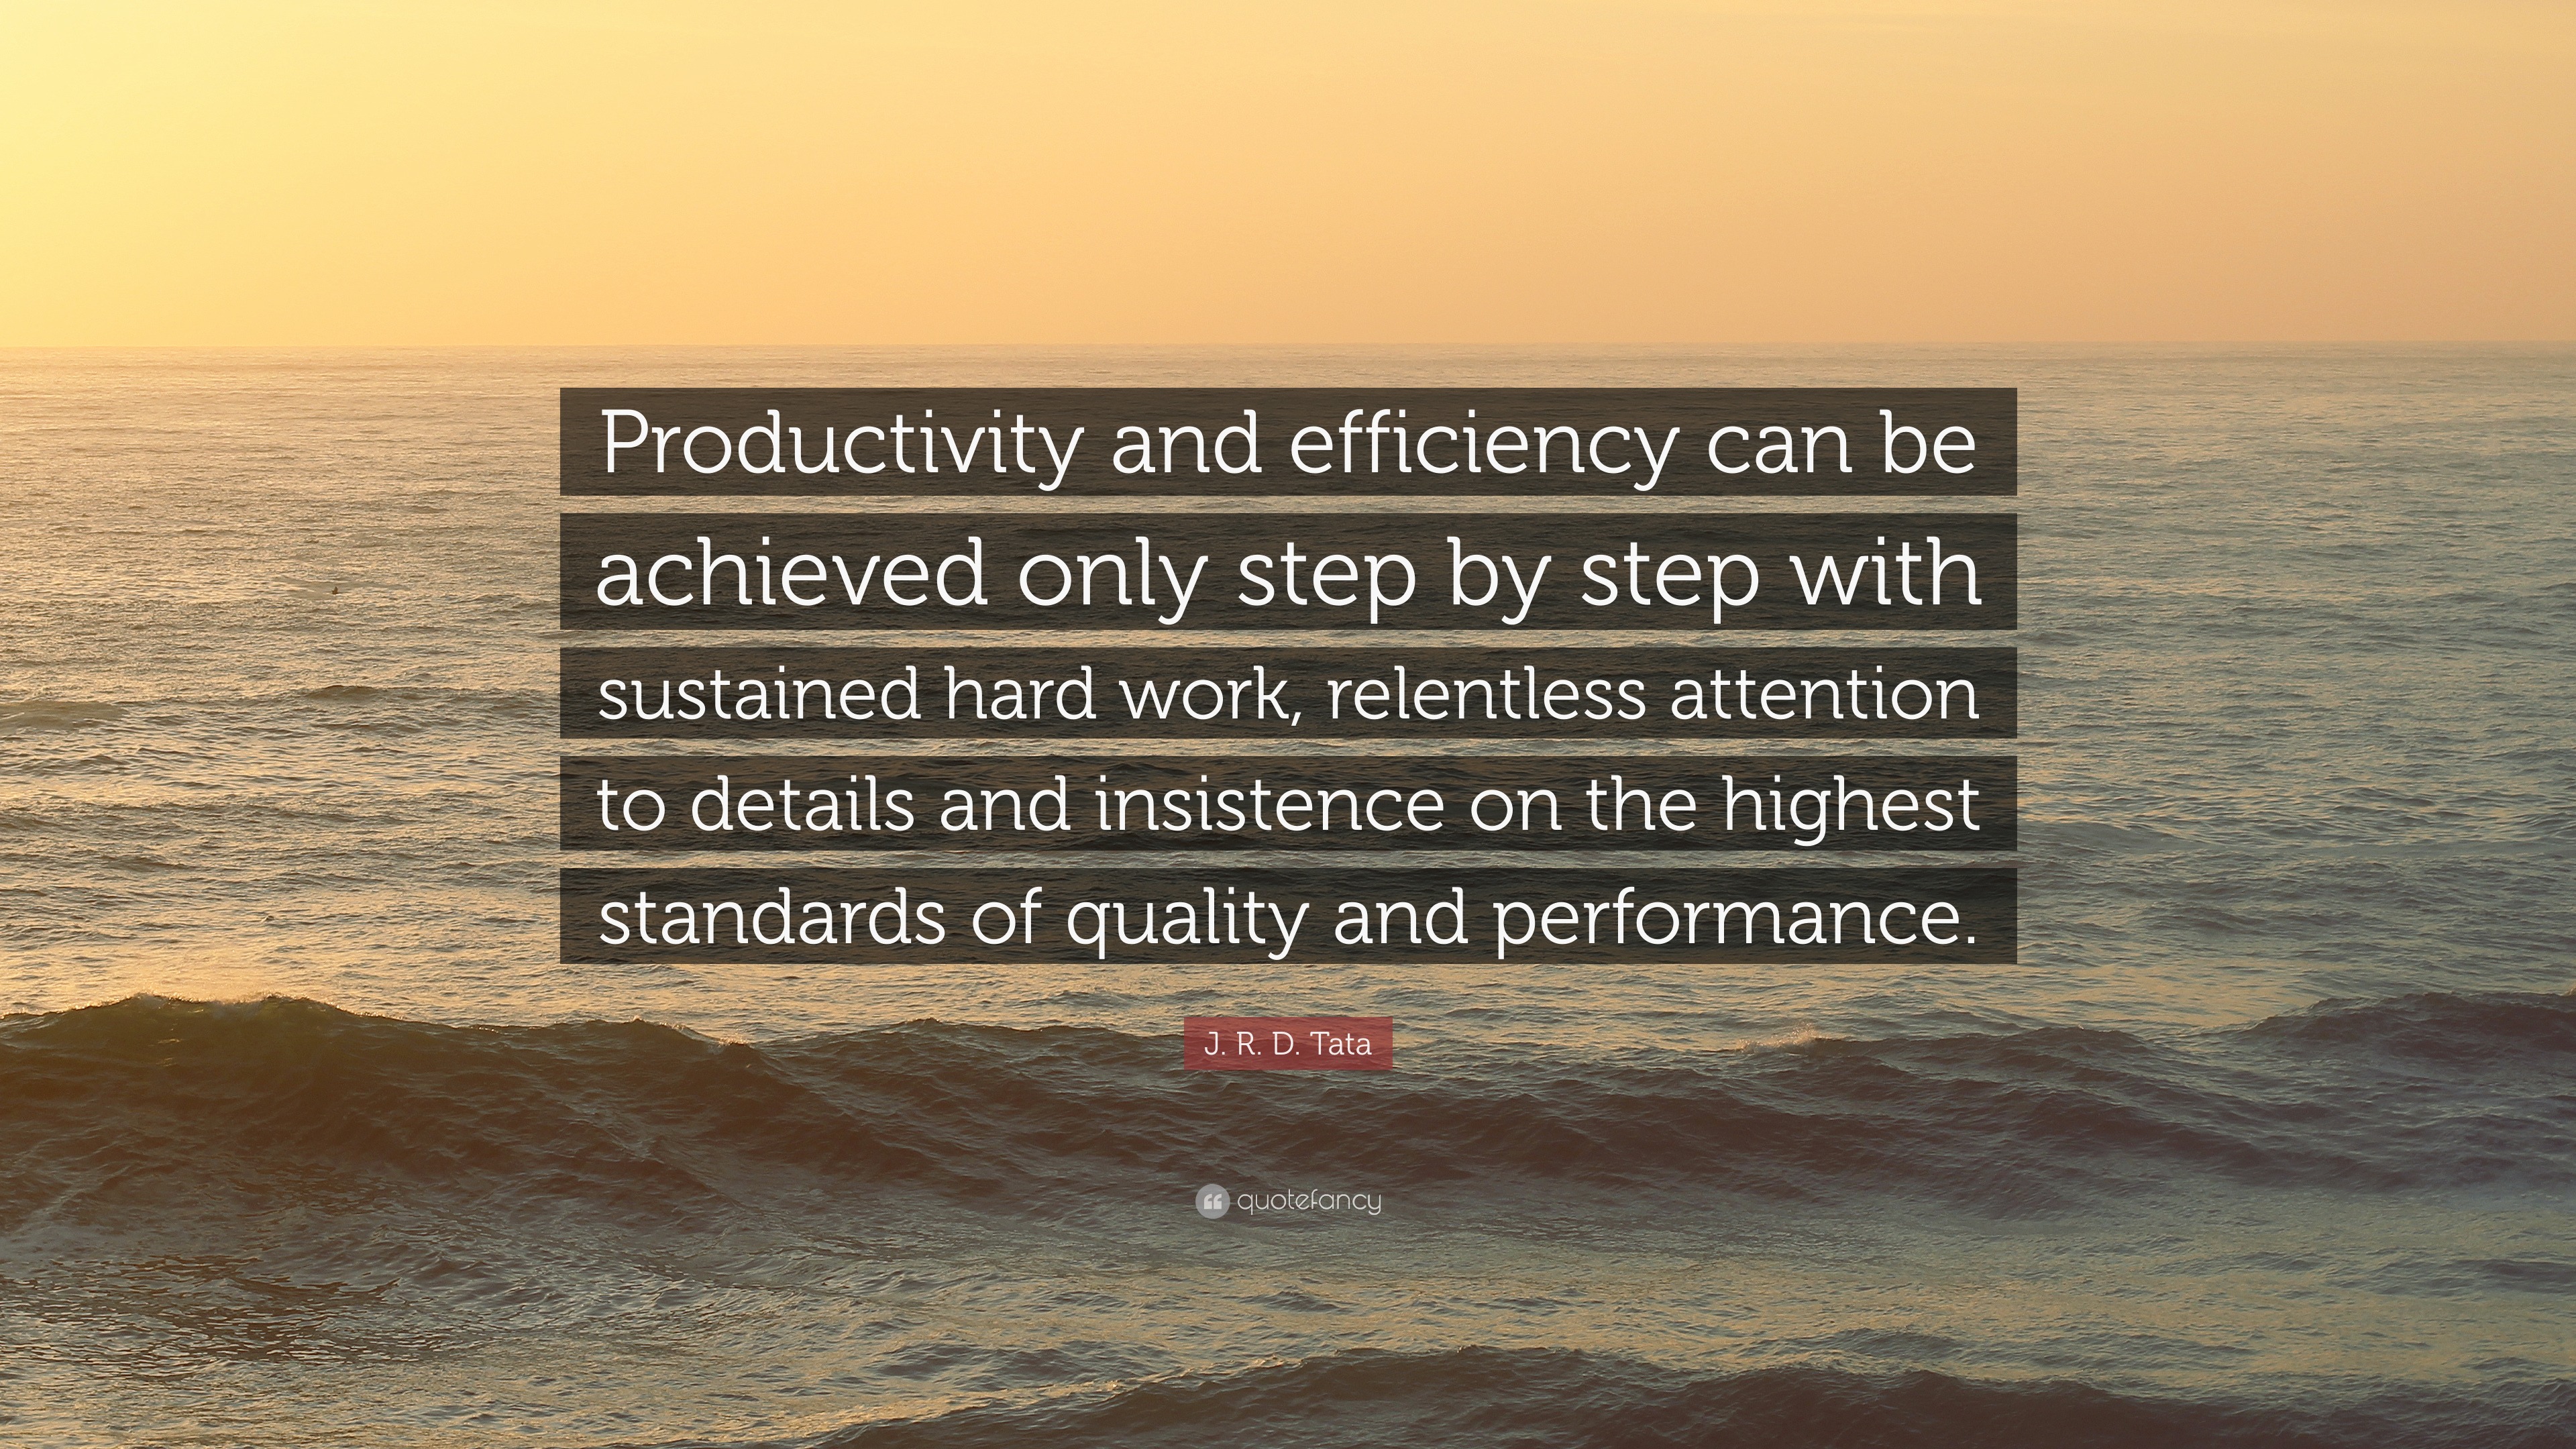 J. R. D. Tata Quote: “Productivity and efficiency can be achieved only